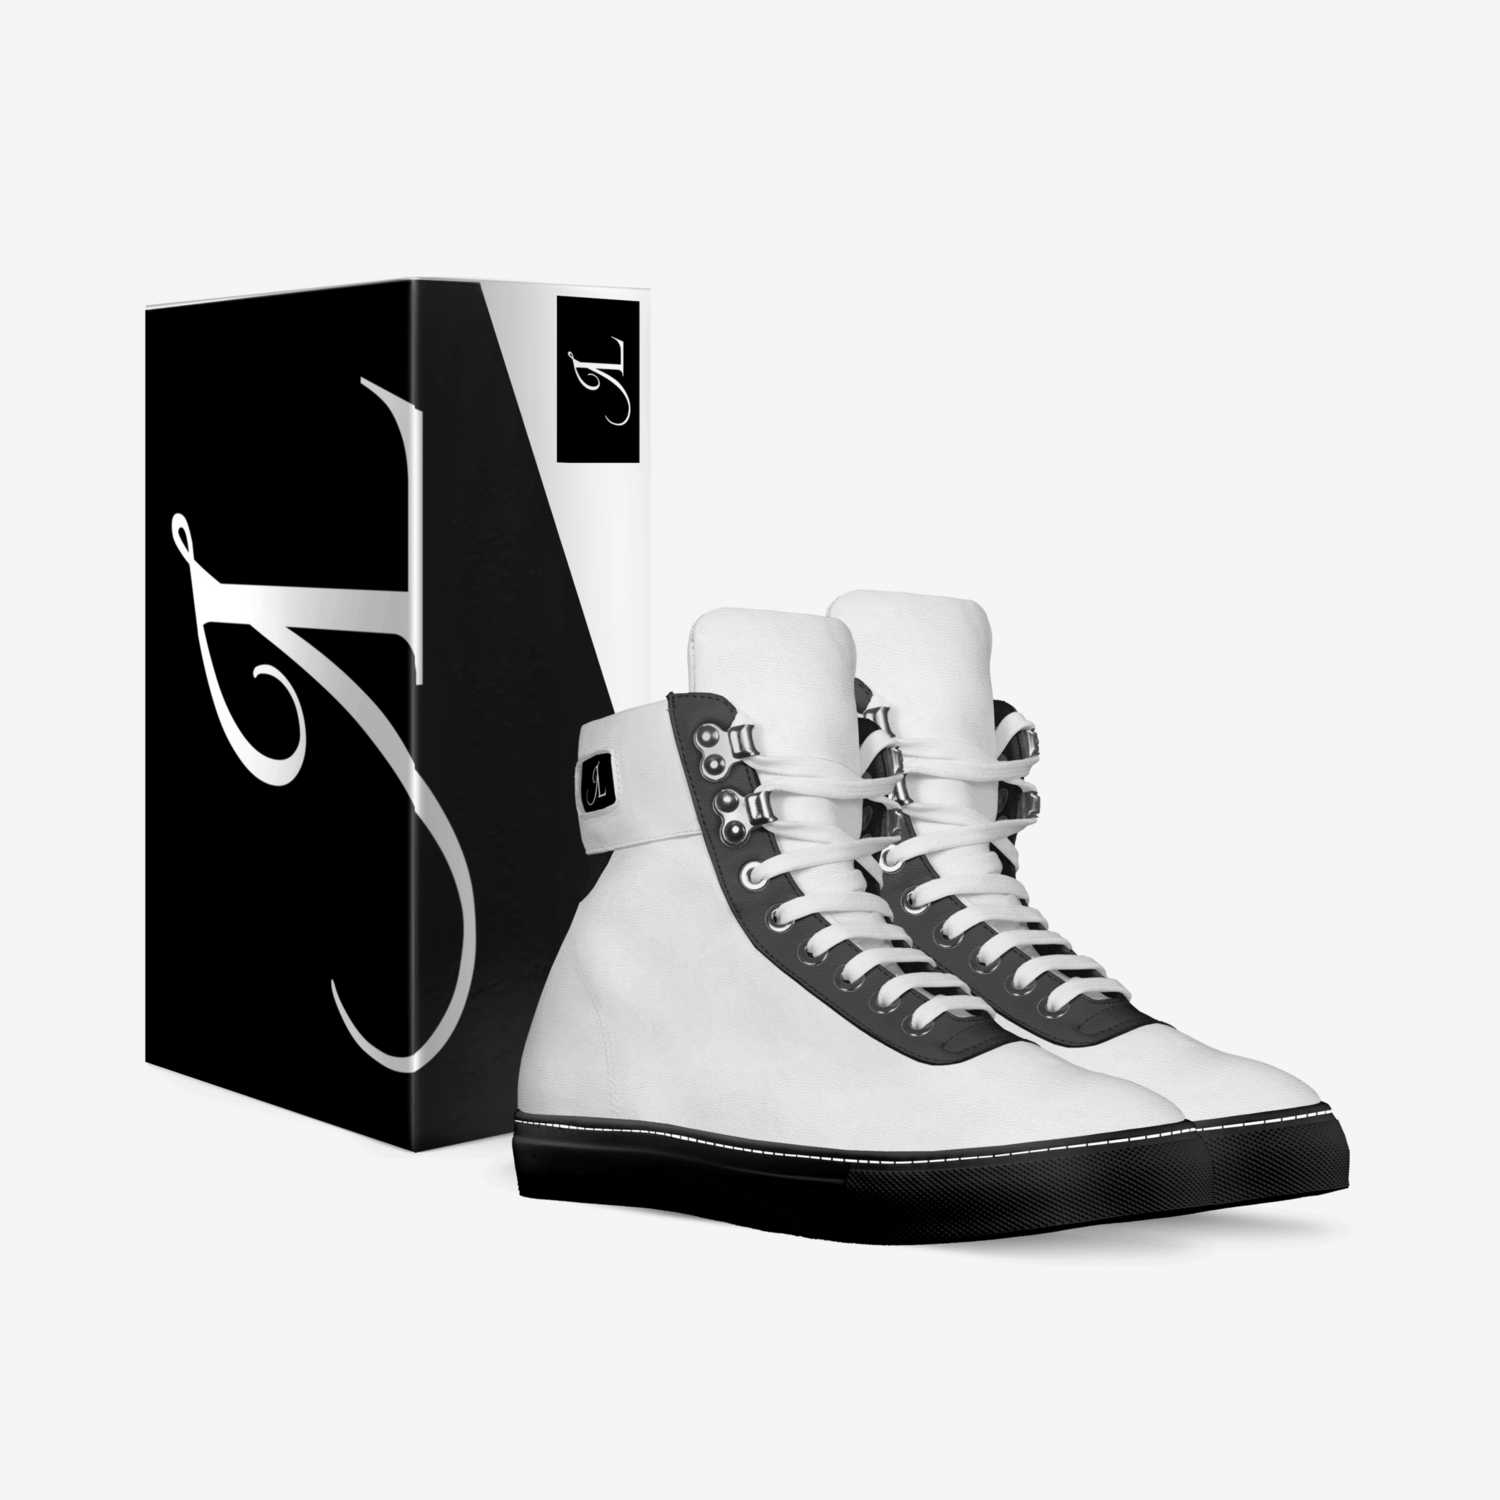 JLUXE9 custom made in Italy shoes by James Luckes | Box view